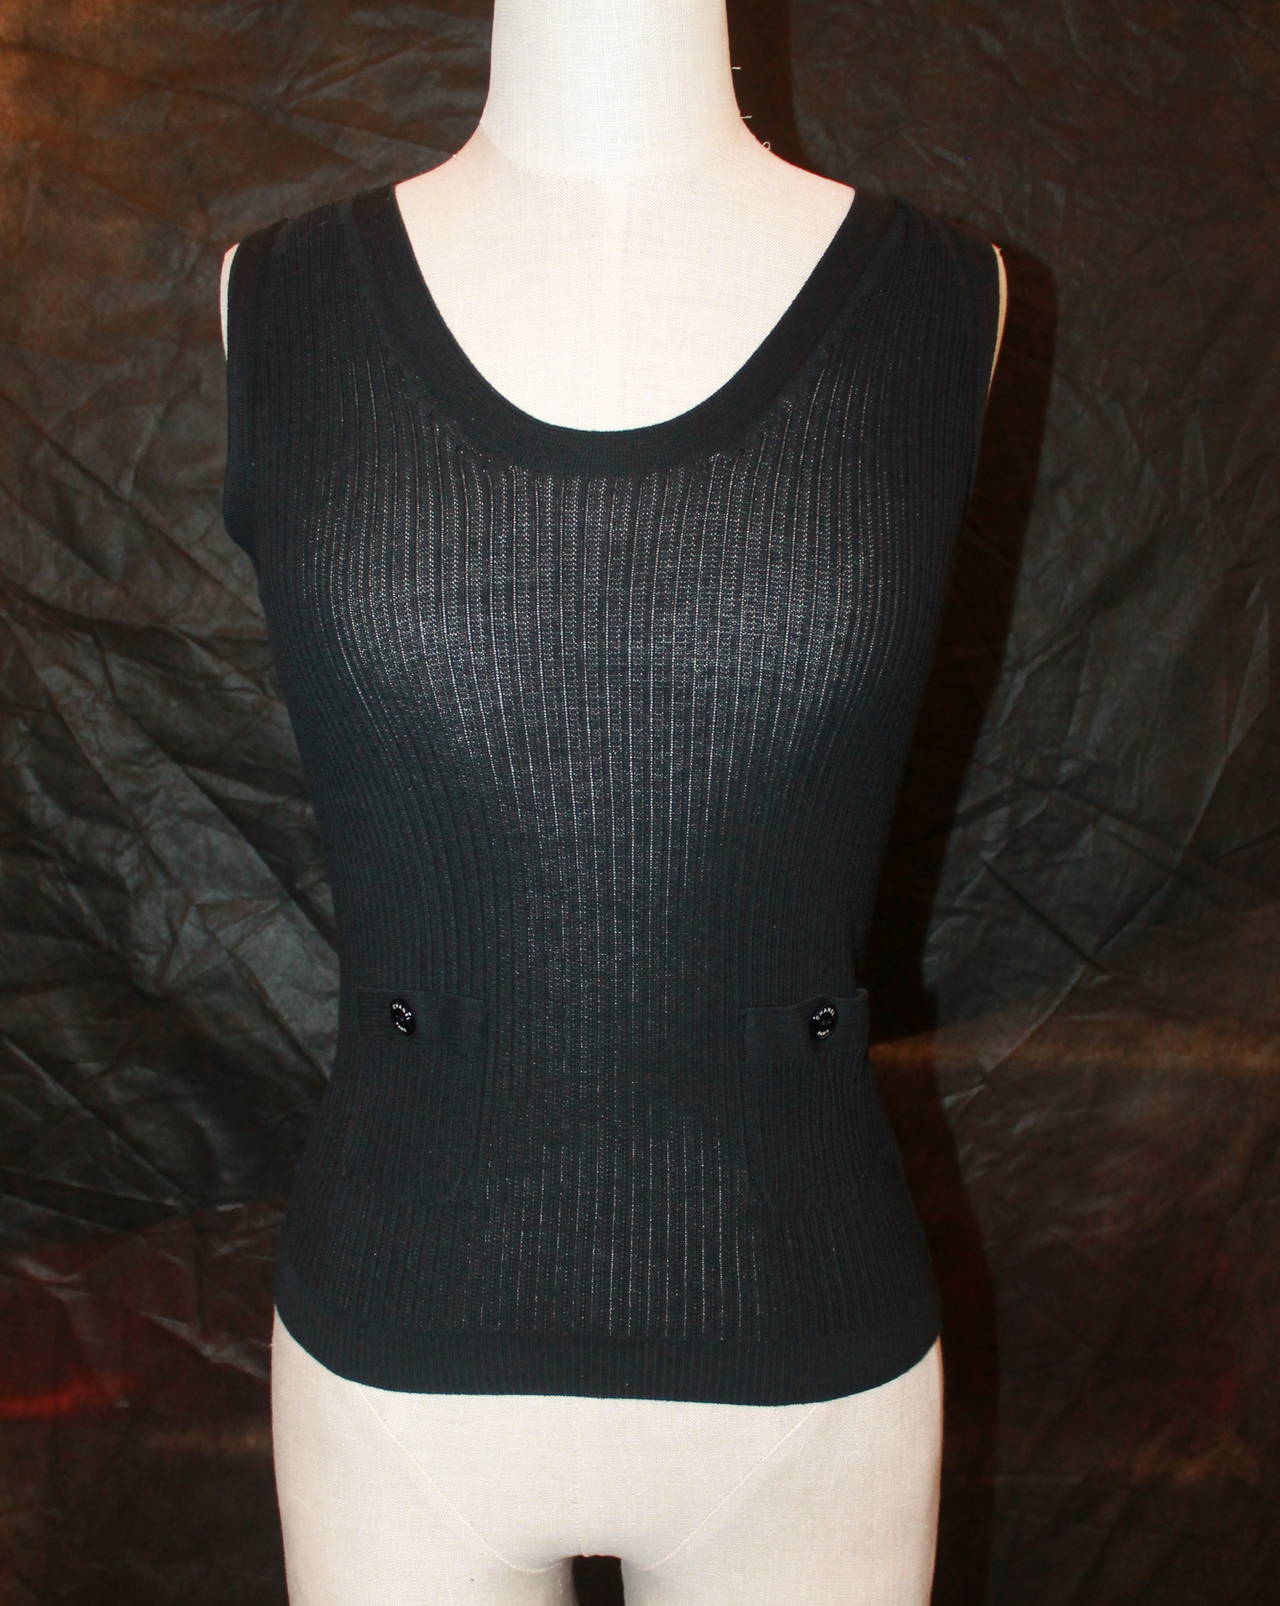 Chanel Black Knitted Sleeveless Top- 34. This top is in very good condition with little wear. It has two pockets in the front. The fabric expands and becomes larger and it's from 2007. 

Measurements:
Bust- 24